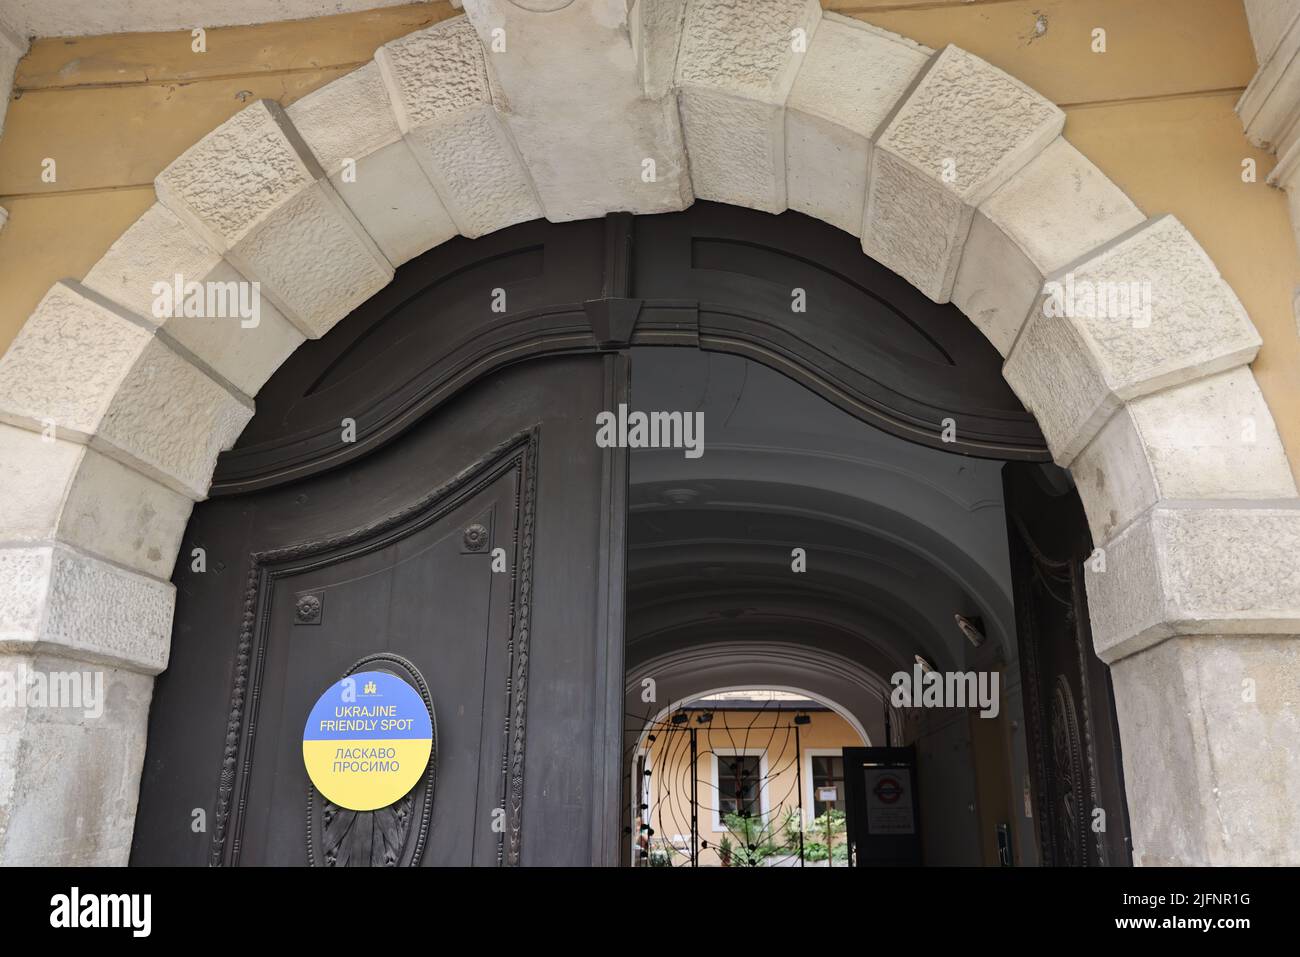 Doors with yellow-blue sign with text 'Ukrajine friendly spot - Ласкаво просимо', indicating that Ukrainian refugees are welcome in this venue Stock Photo